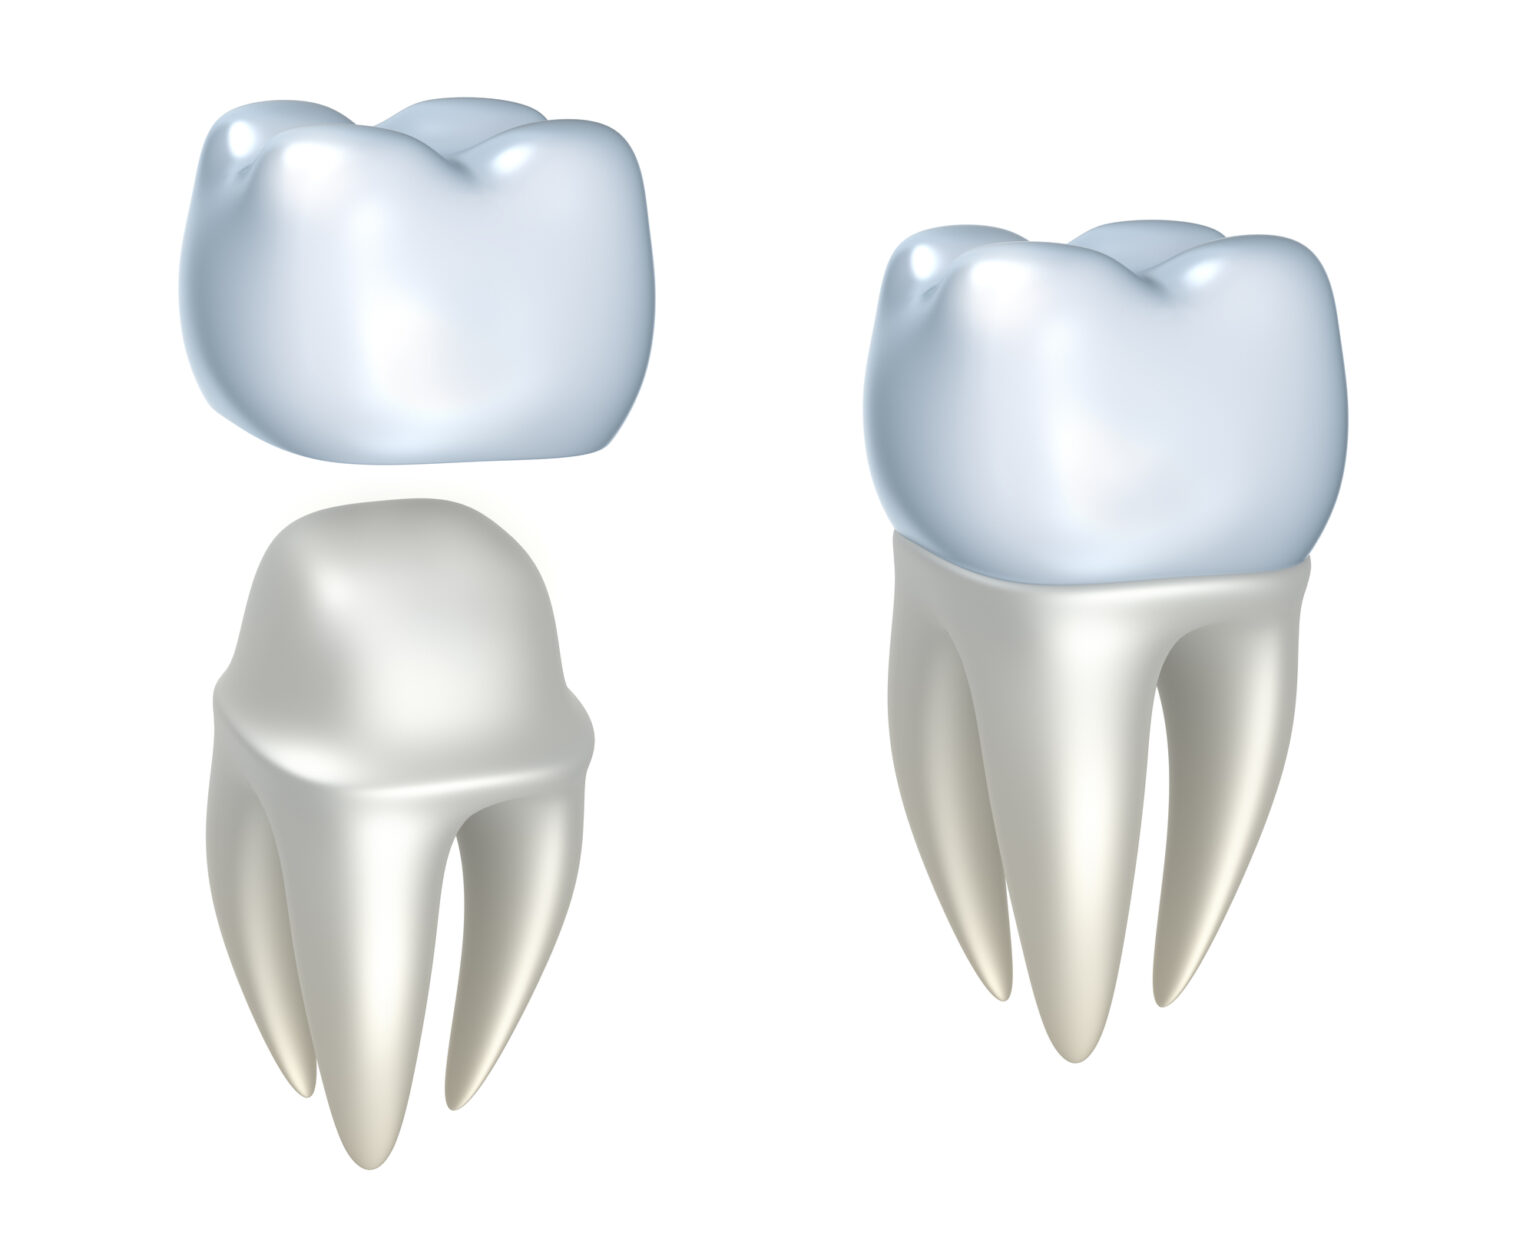 3d illustration of a human molar and premolar tooth in a Texas dentistry office.